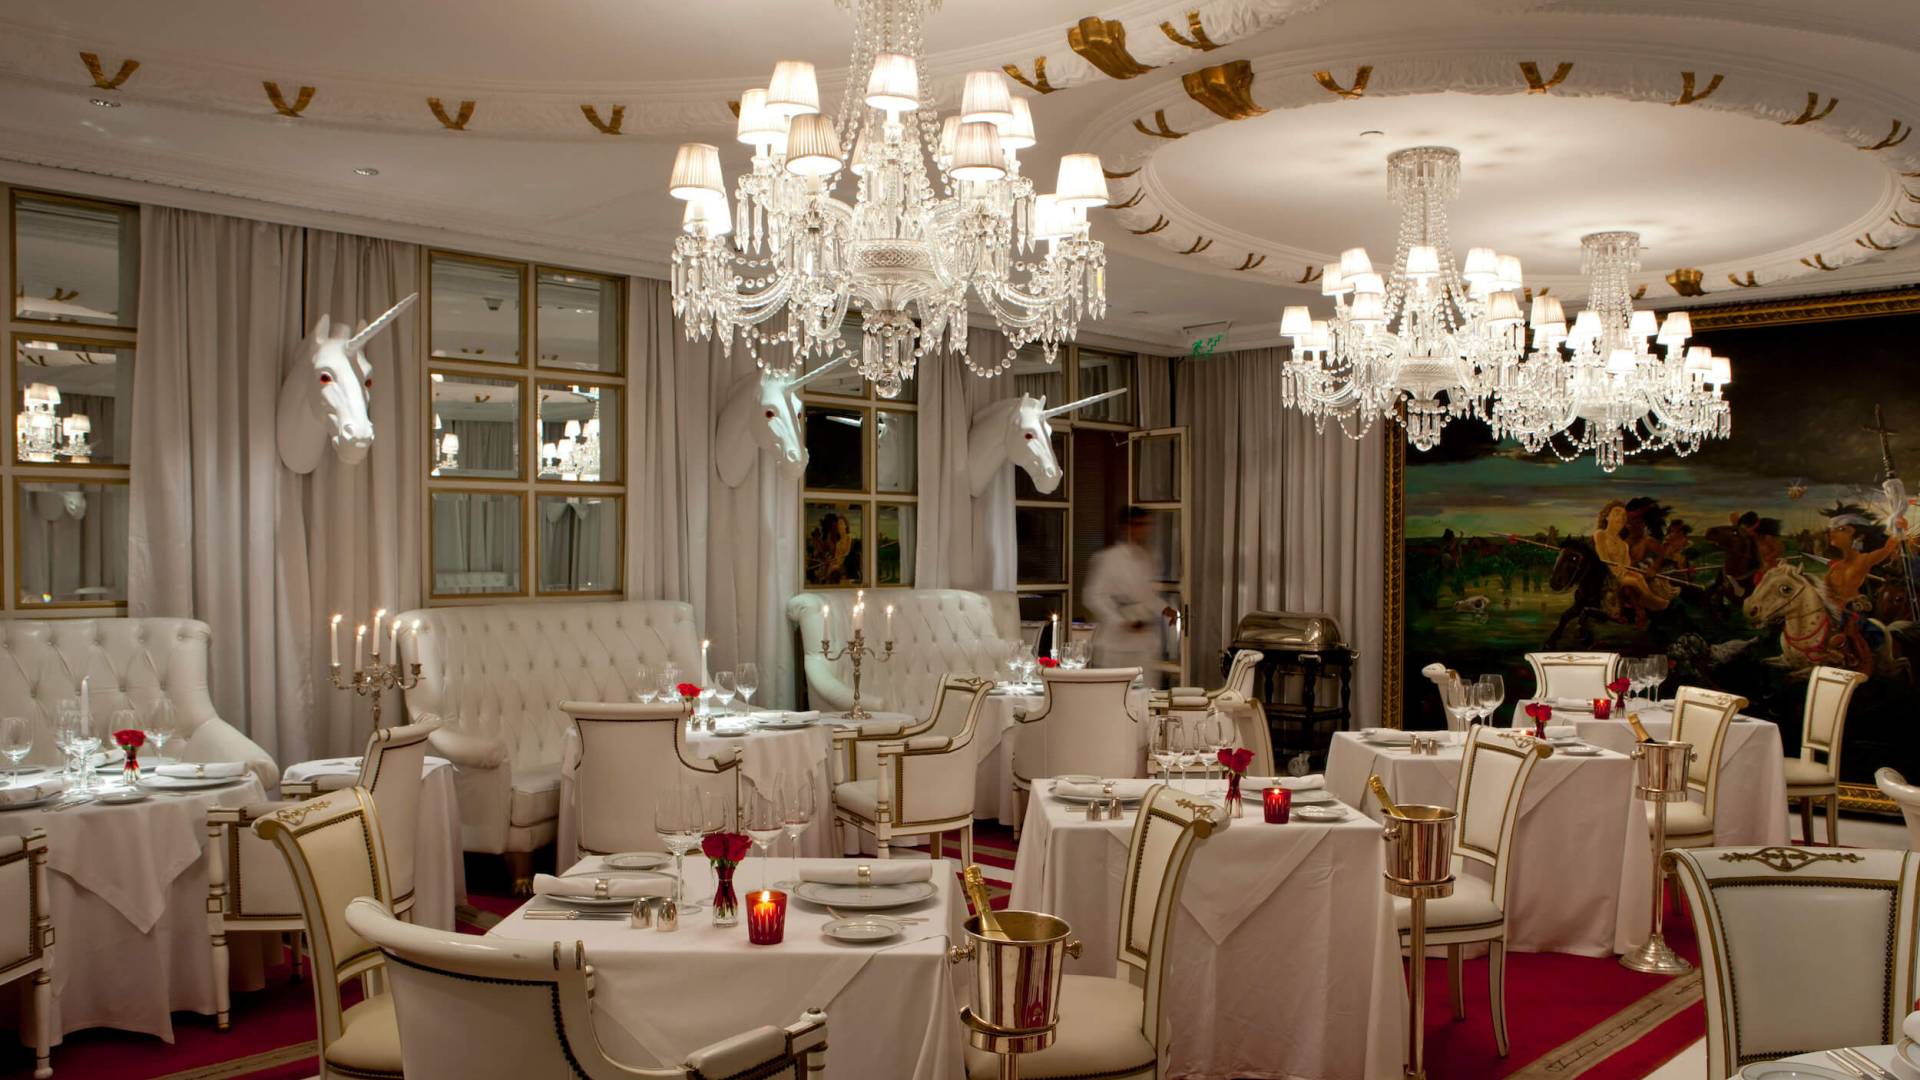 grand dining room with three chandeliers, unicorn heads on walls, red carpet, and white booths, tables, and chairs